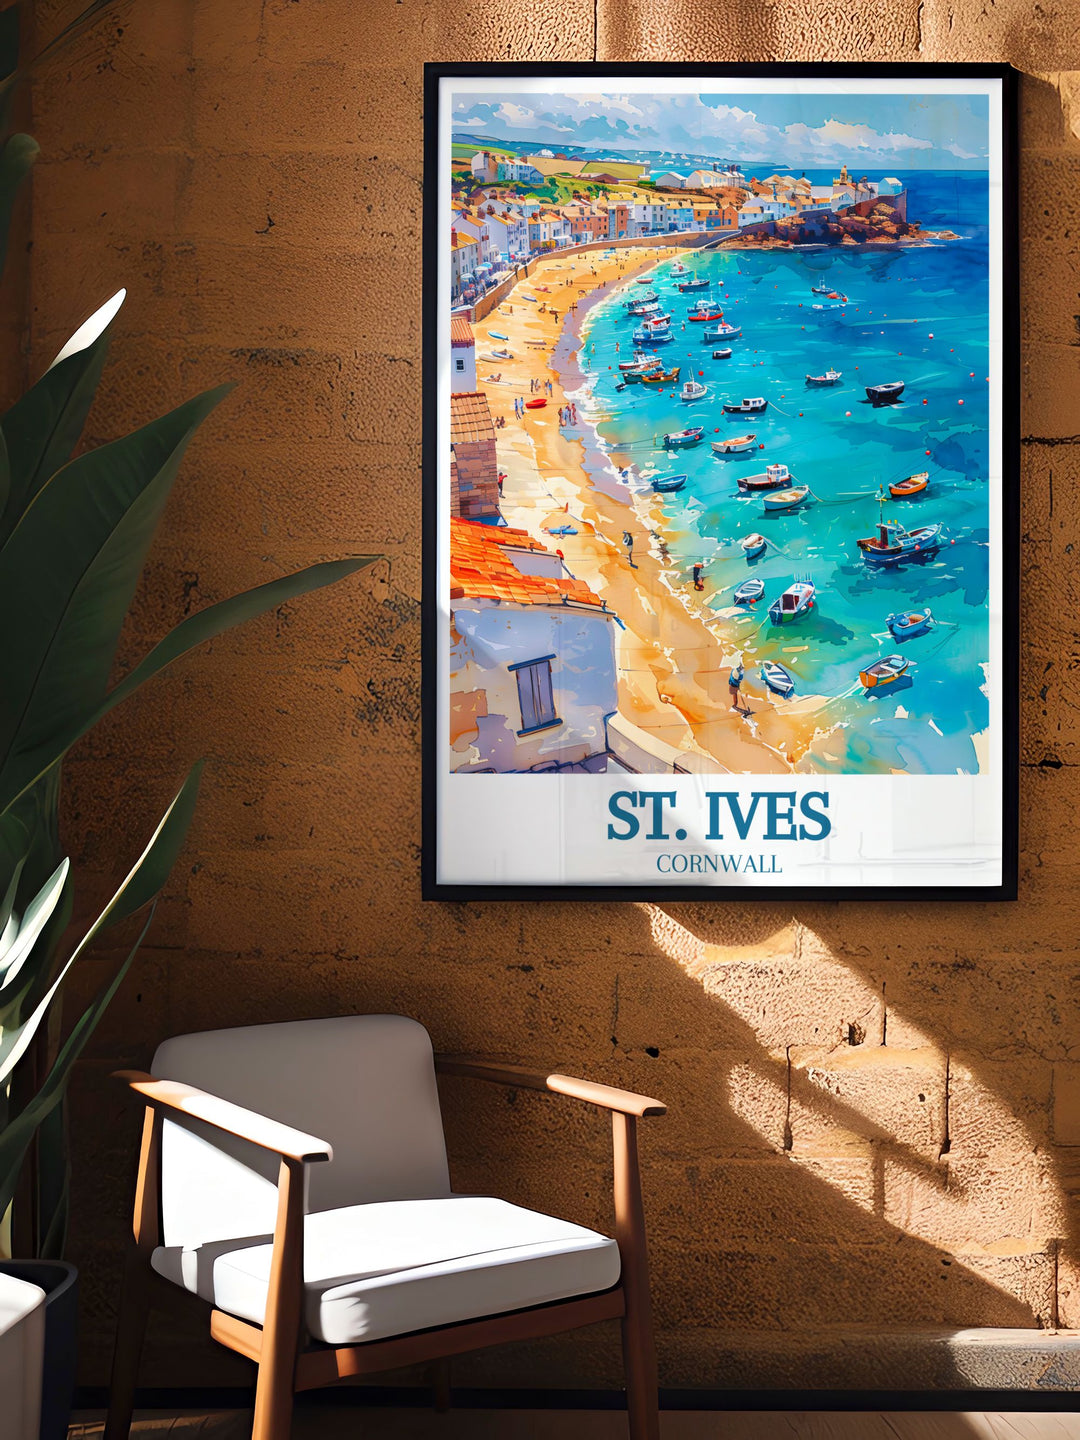 Porthmeor Beachs golden sands and clear waters are beautifully illustrated in this poster, inviting viewers to discover the beauty of Cornwalls coast.